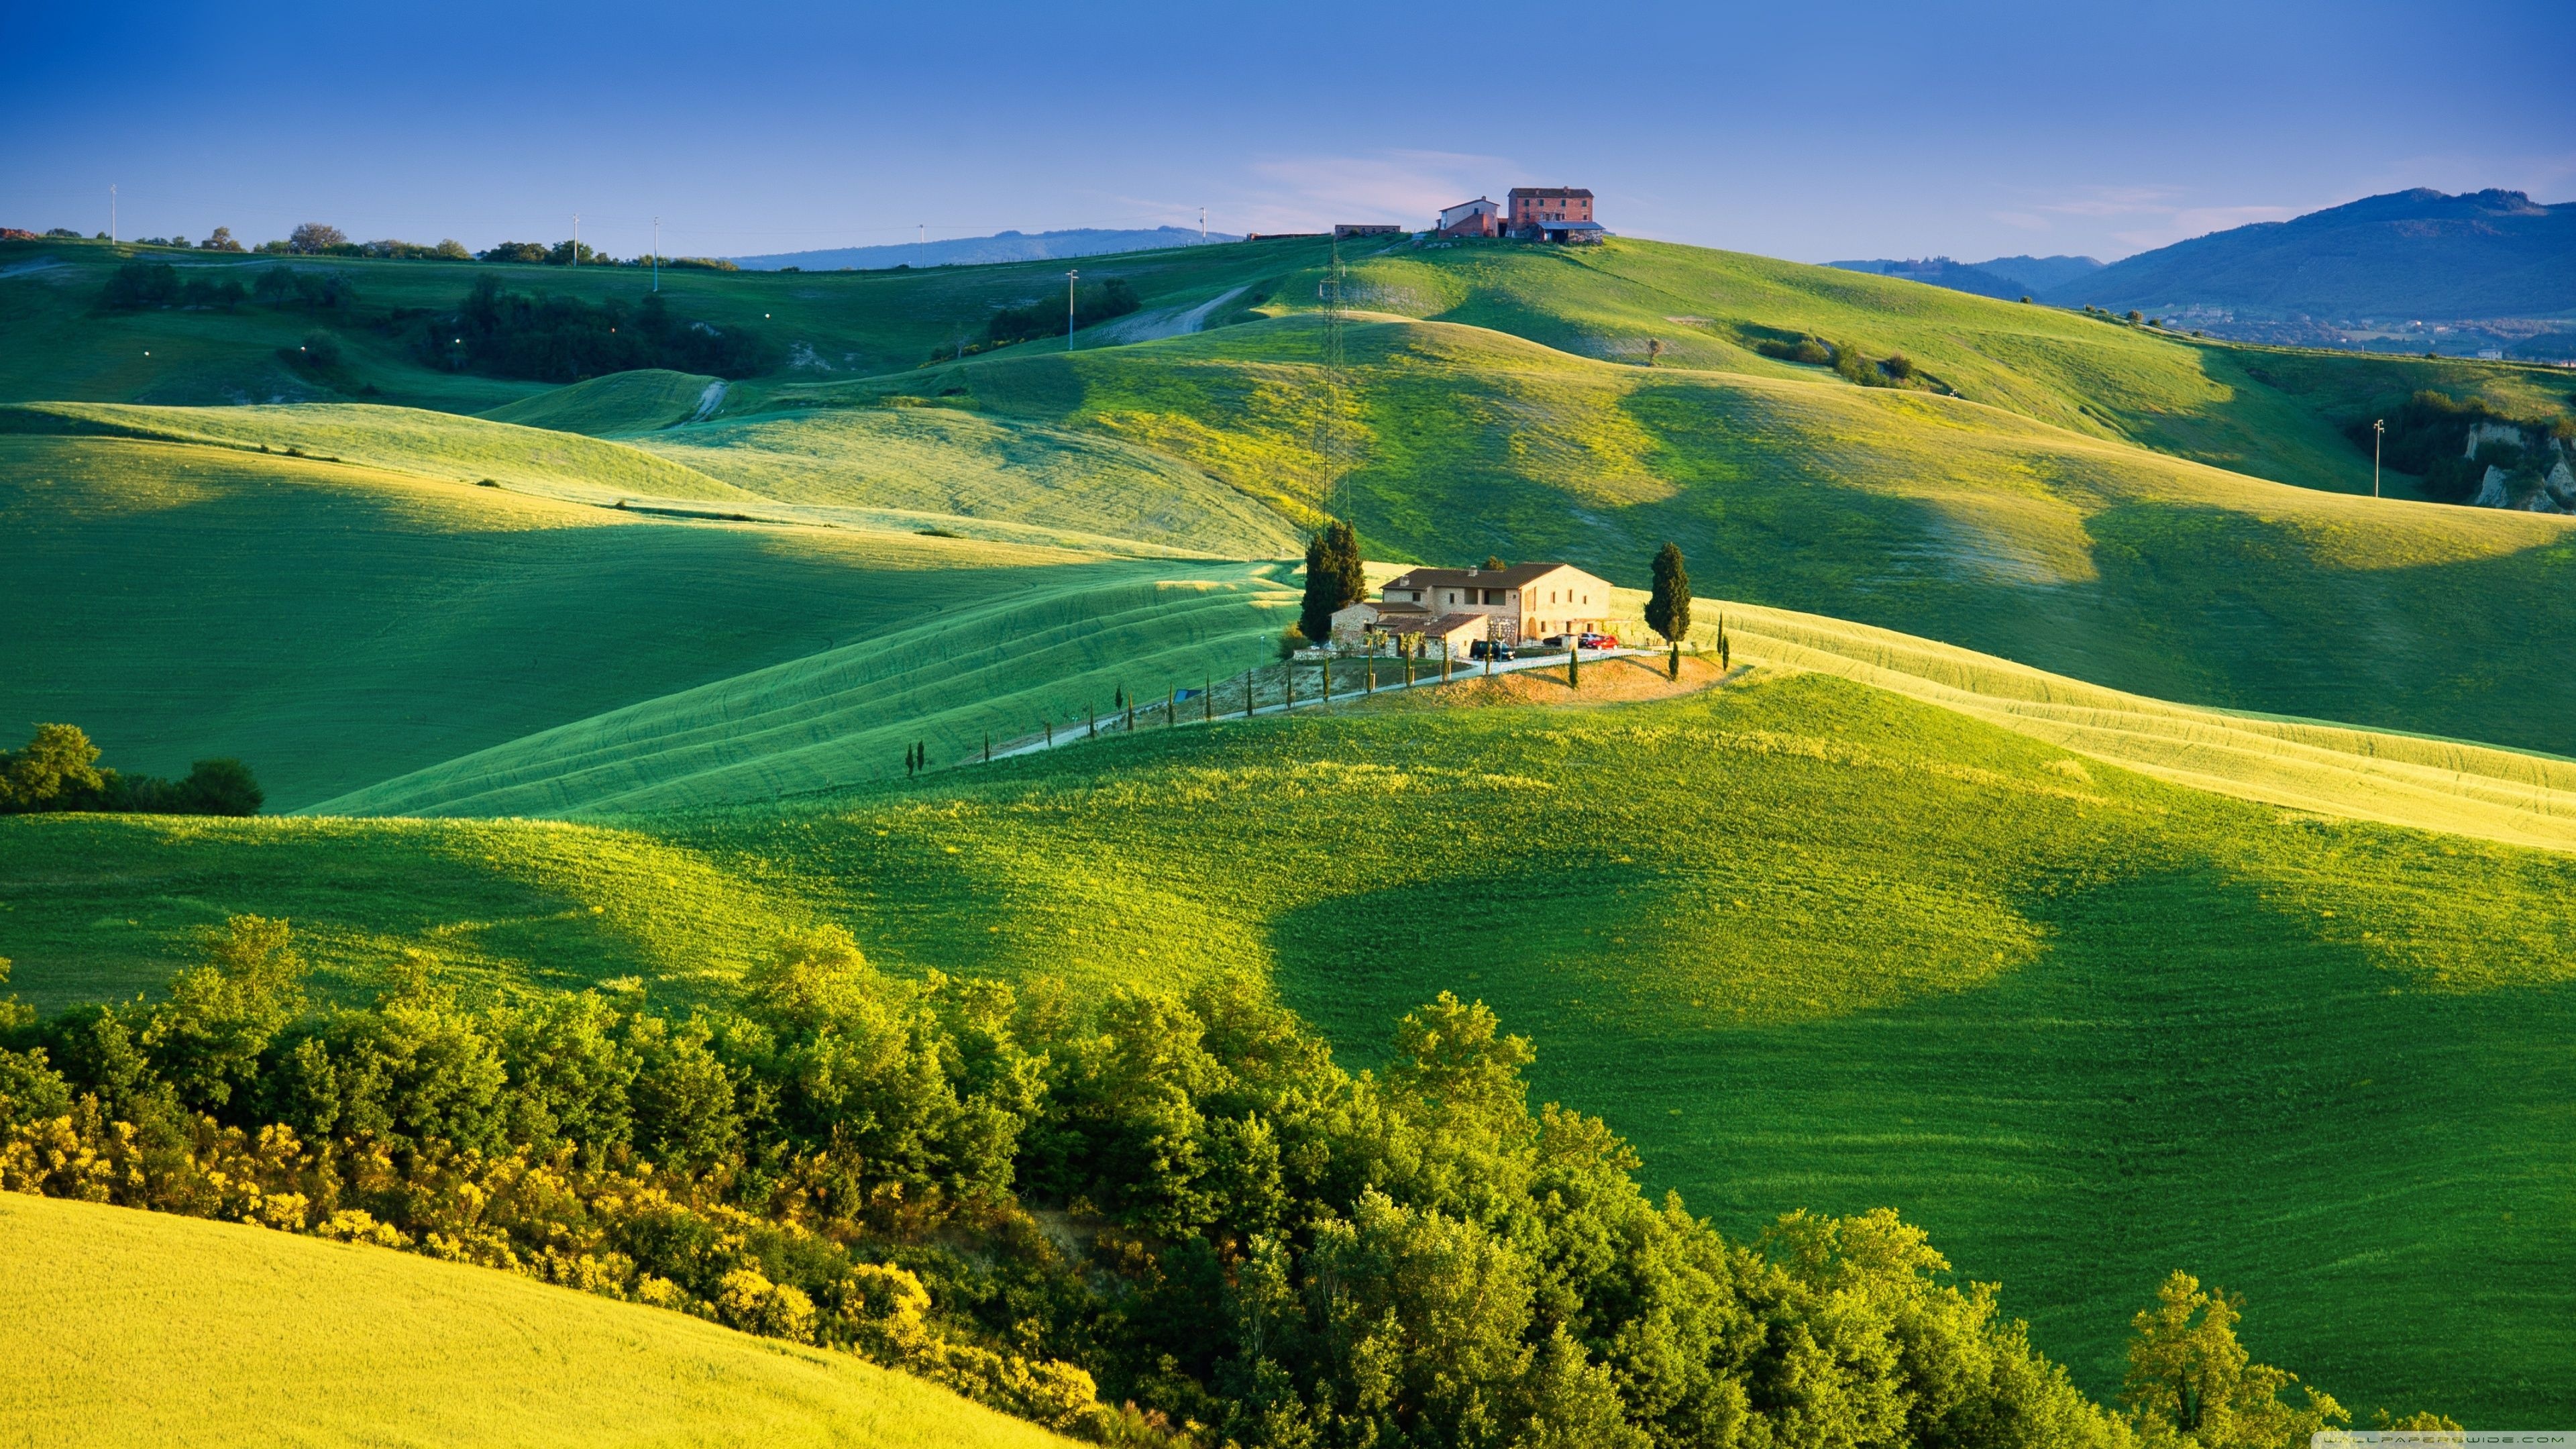 Landscape: Tuscany region in central Italy, Italian-style country houses surrounded by green fields. 3840x2160 4K Wallpaper.